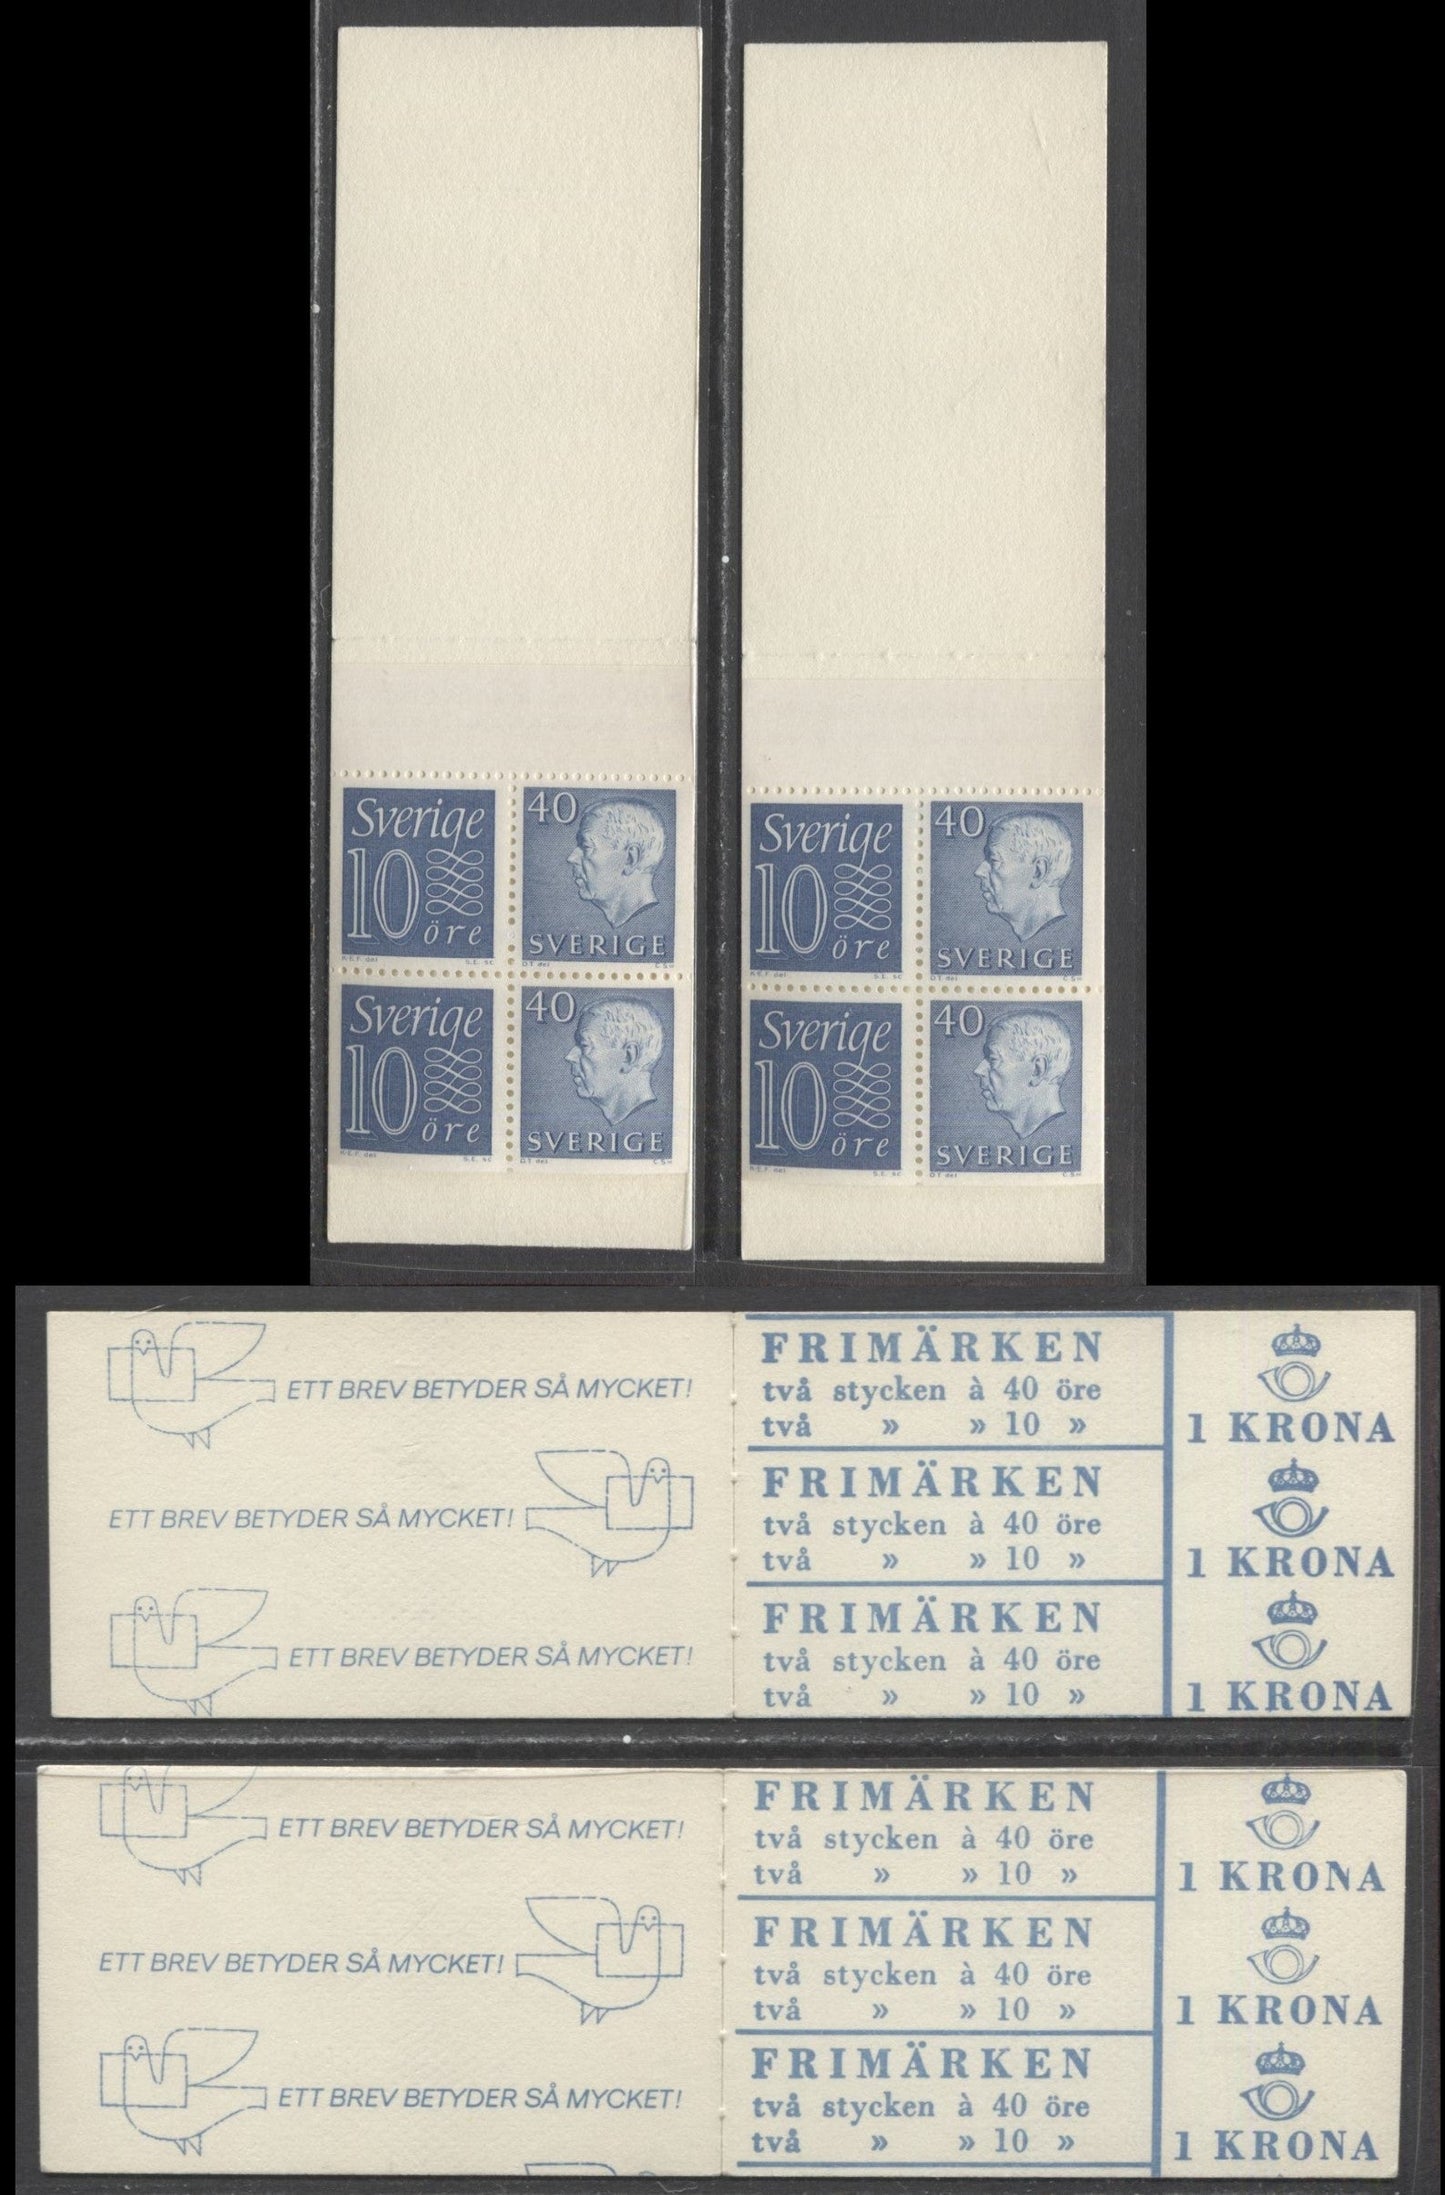 Lot 191 Sweden SC#669b (Facit #HA12ARV)/669b (Facit #HA12B1RV) 1964 Re-Engraved King Gustav VI Adolf Definitive Issue, Upright Panes, Stamps Out Of Vertical Alignment, Two Slightly Different Shades, 2 VFNH Booklets of 4 (2 +2),  Estimated Value $5